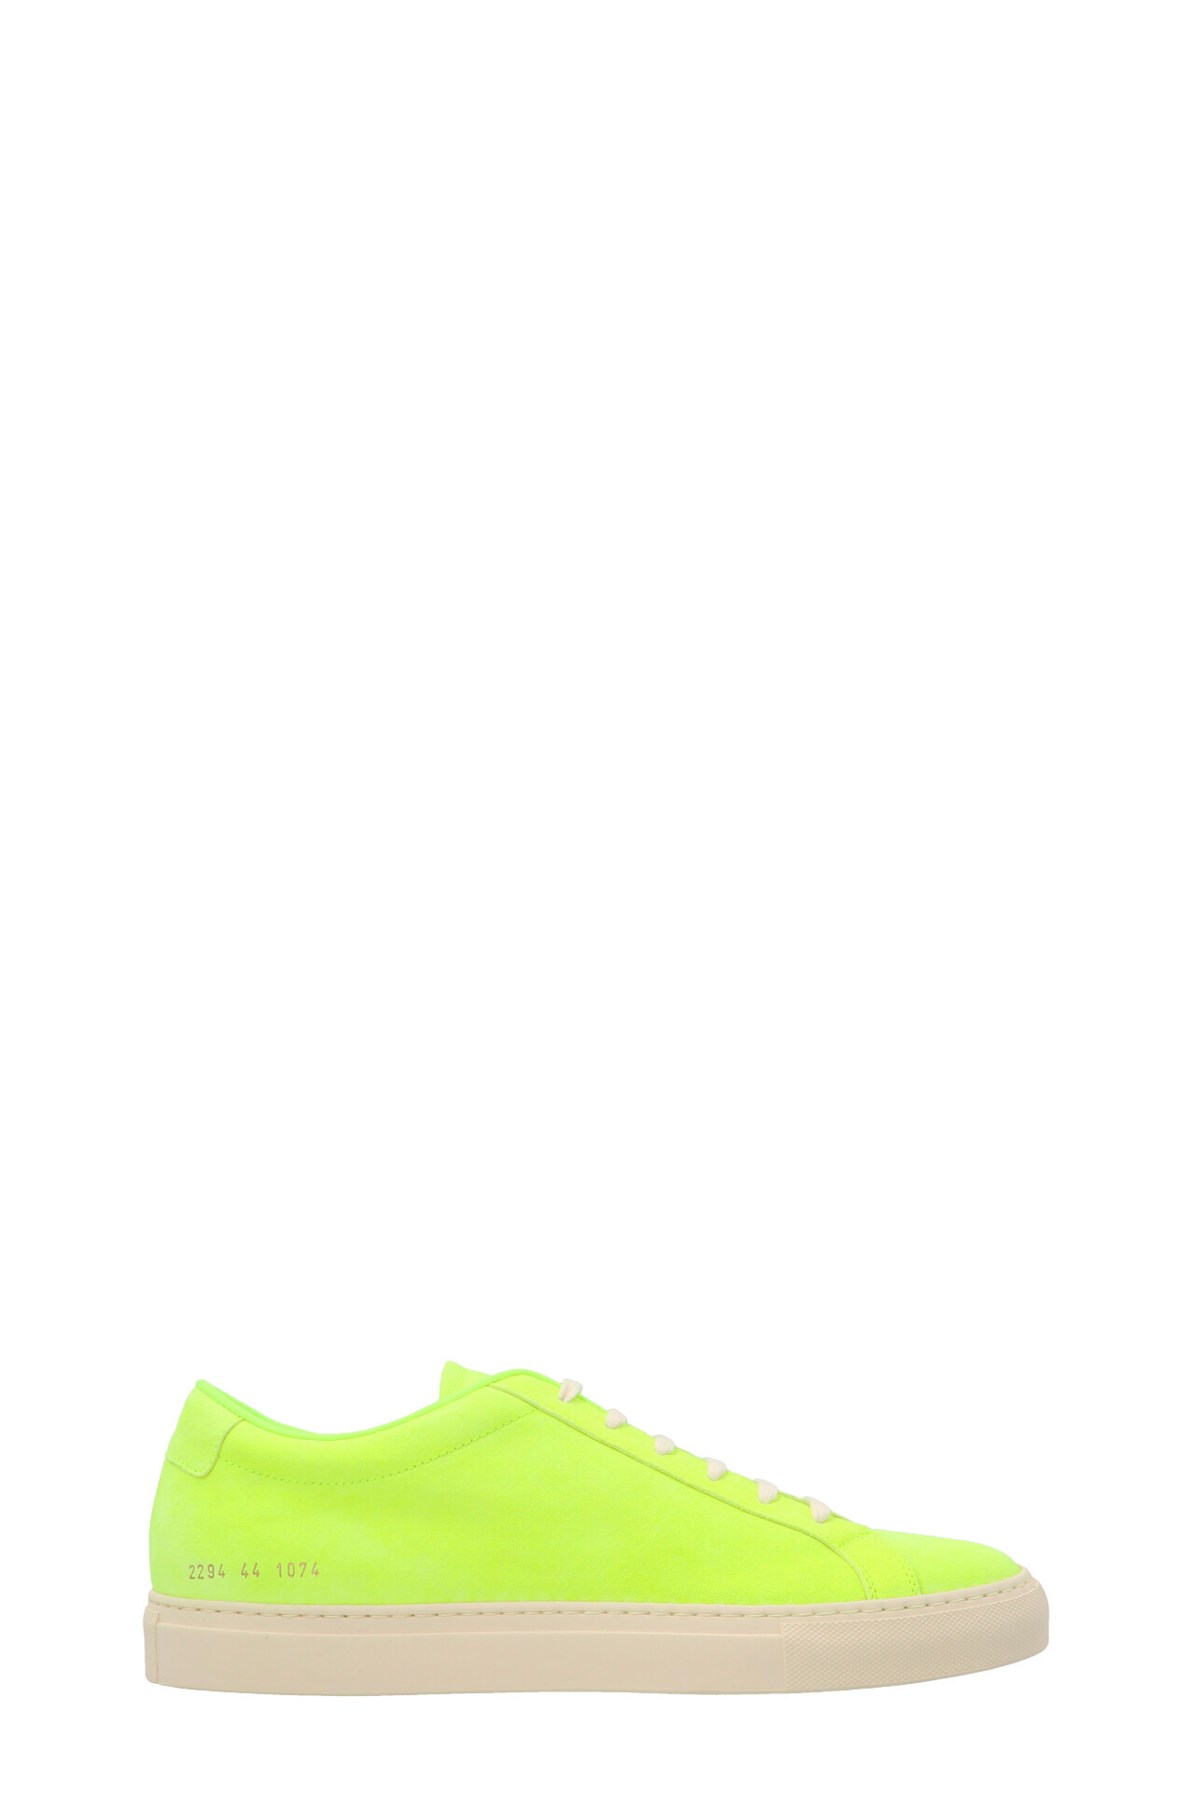 COMMON PROJECTS 'Achilles Fluo’ Sneakers